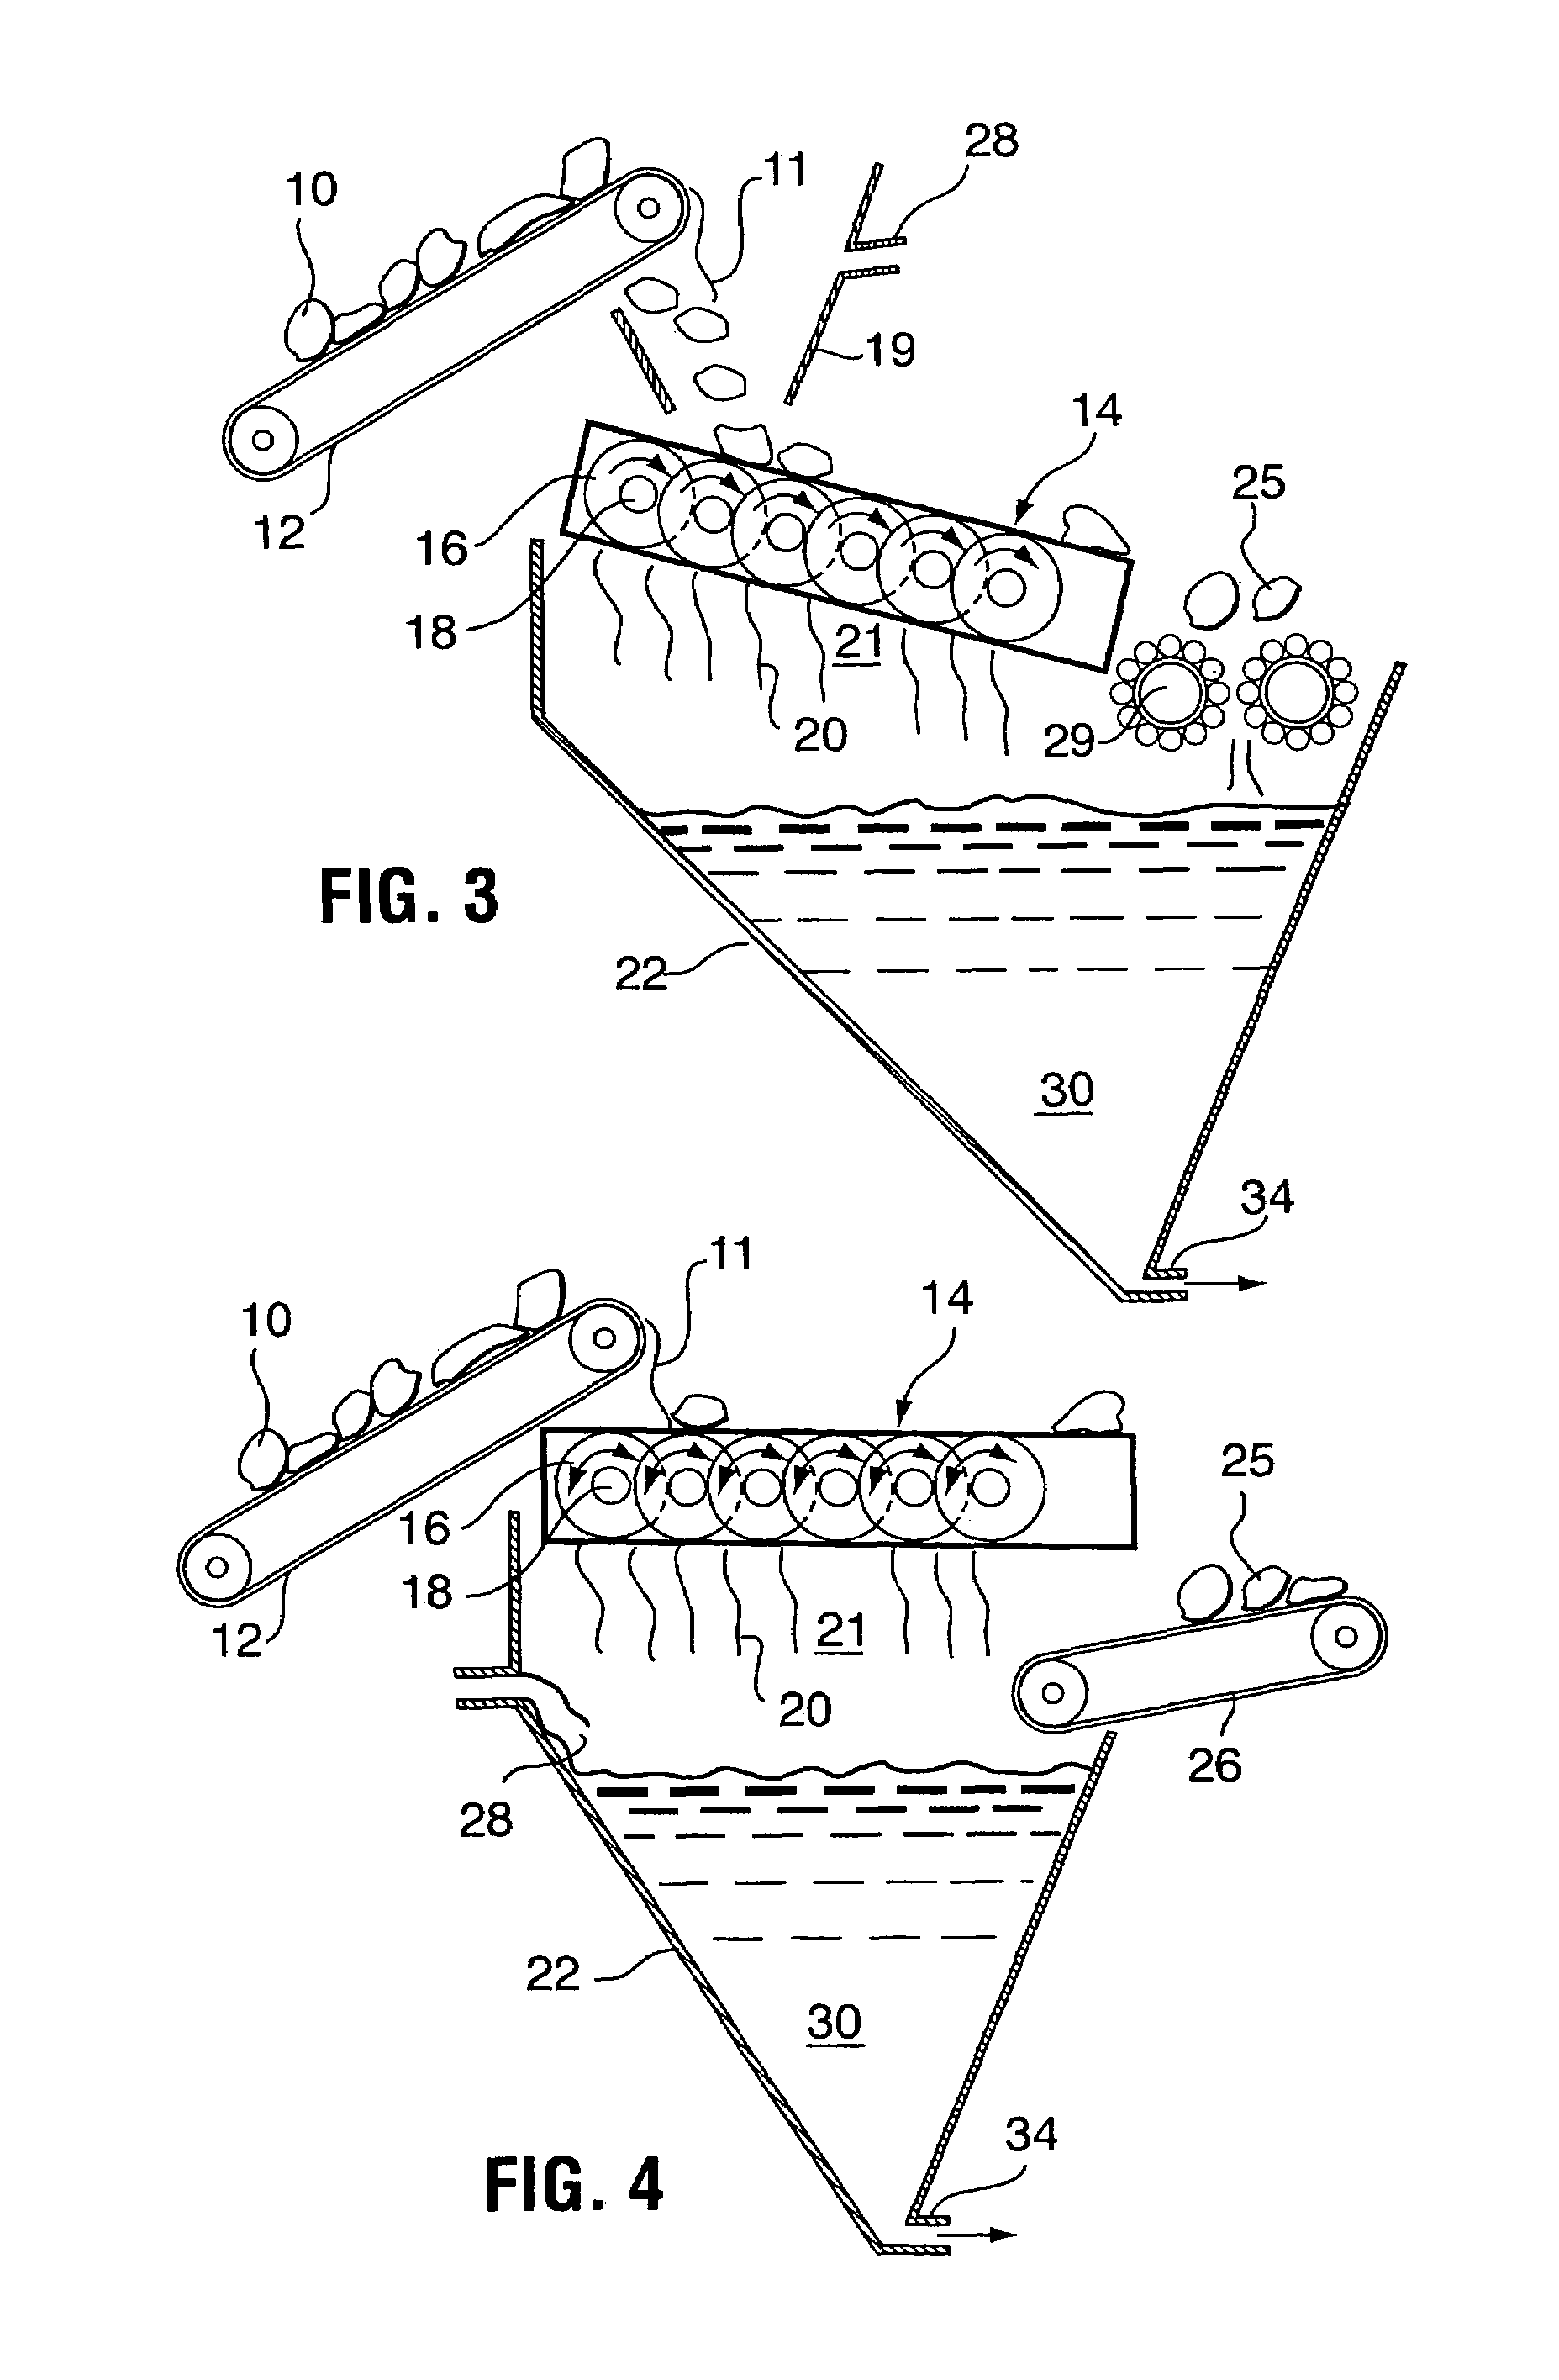 Sizing roller screen ore processing apparatus